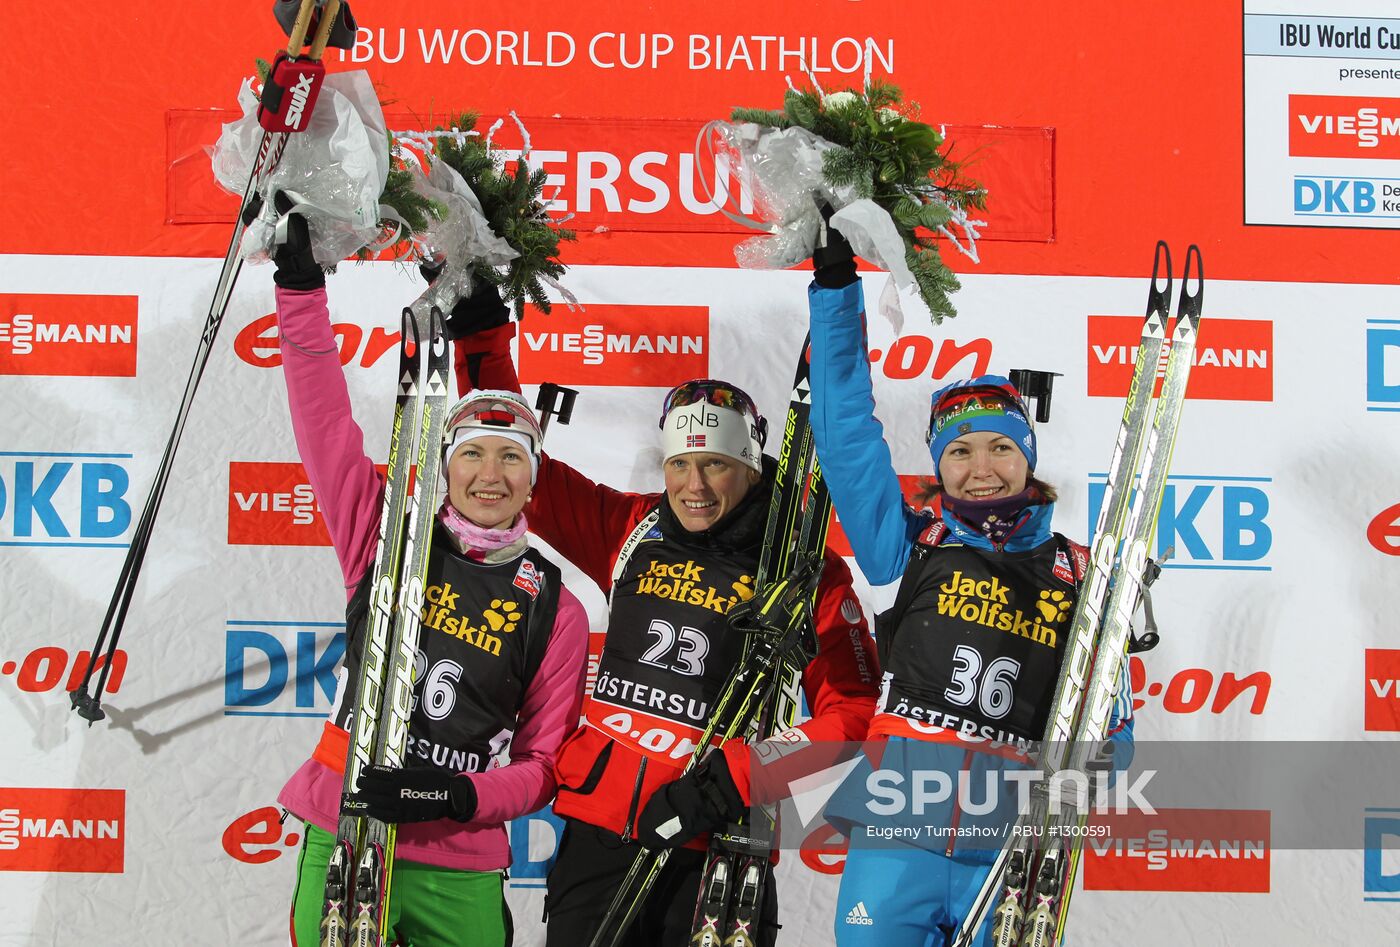 Biathlon. First stage of World Cup. Women's Individual